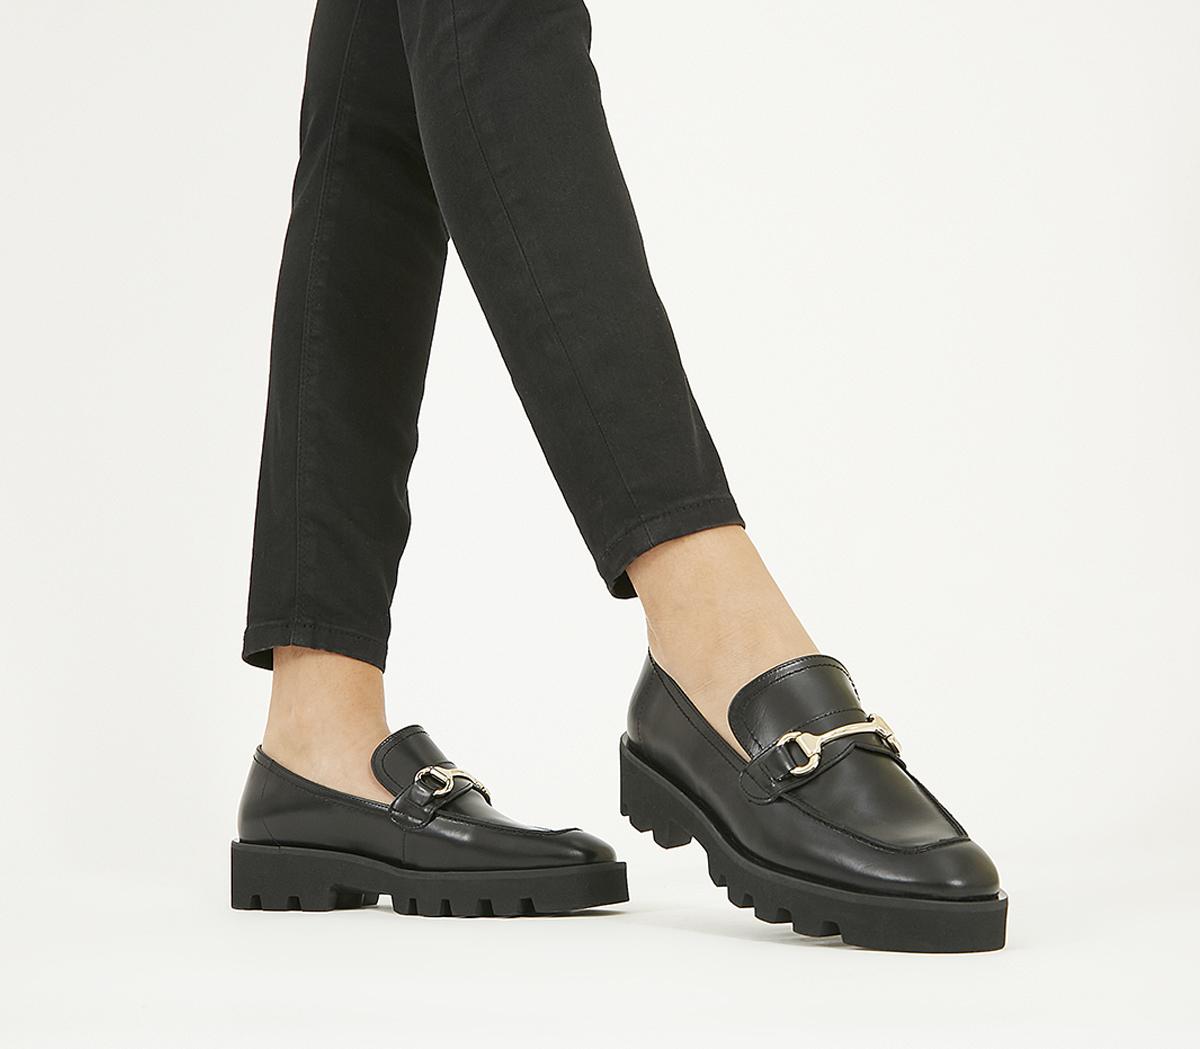 OFFICEFixate Chunky Trim LoafersBlack Leather